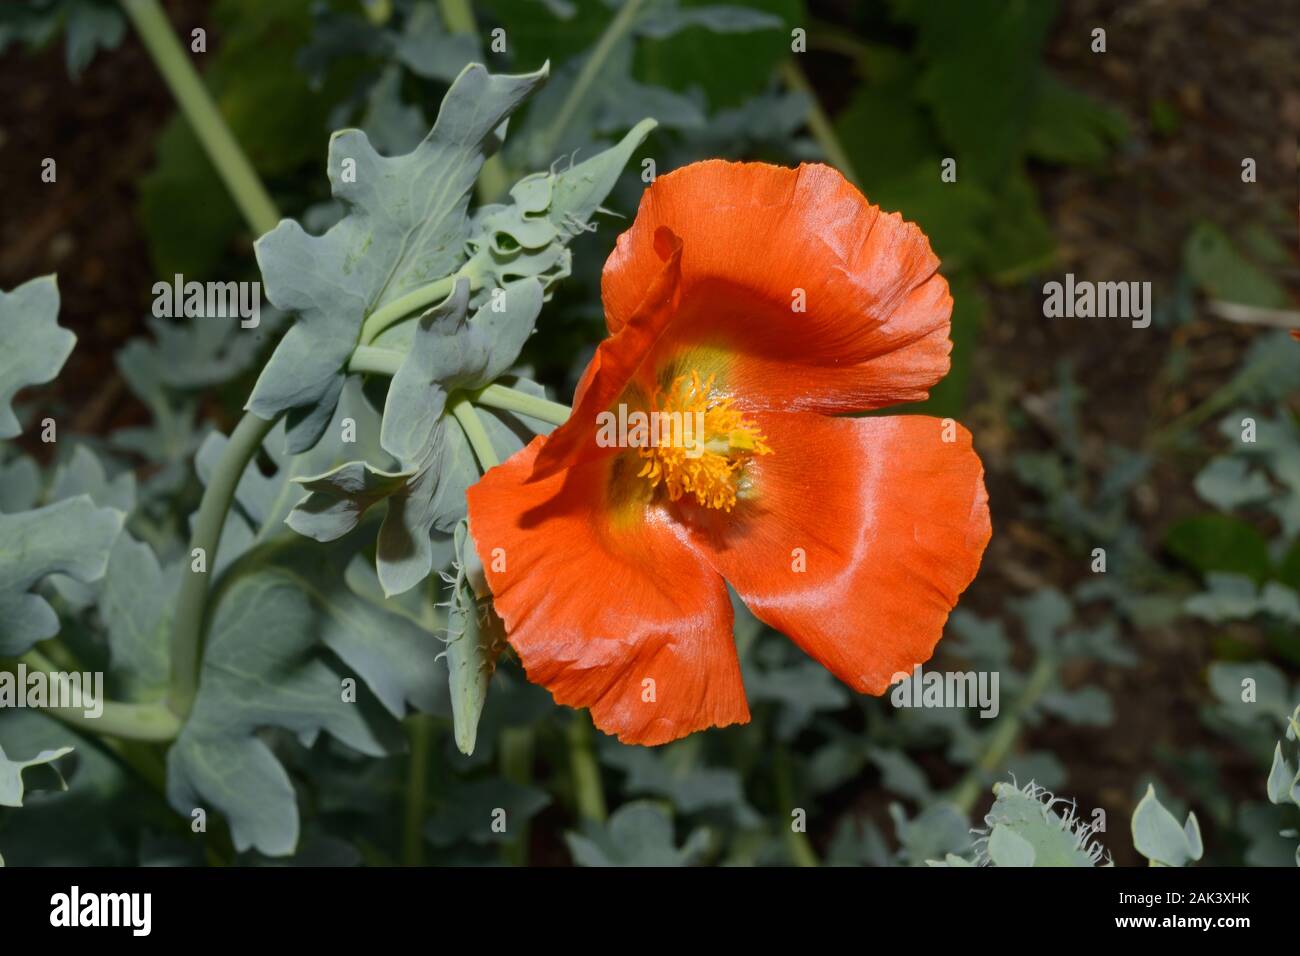 Glaucium flavum var. aurantiacum is an orange variety of the normally yellow horned poppy known as the orange horned poppy. Stock Photo